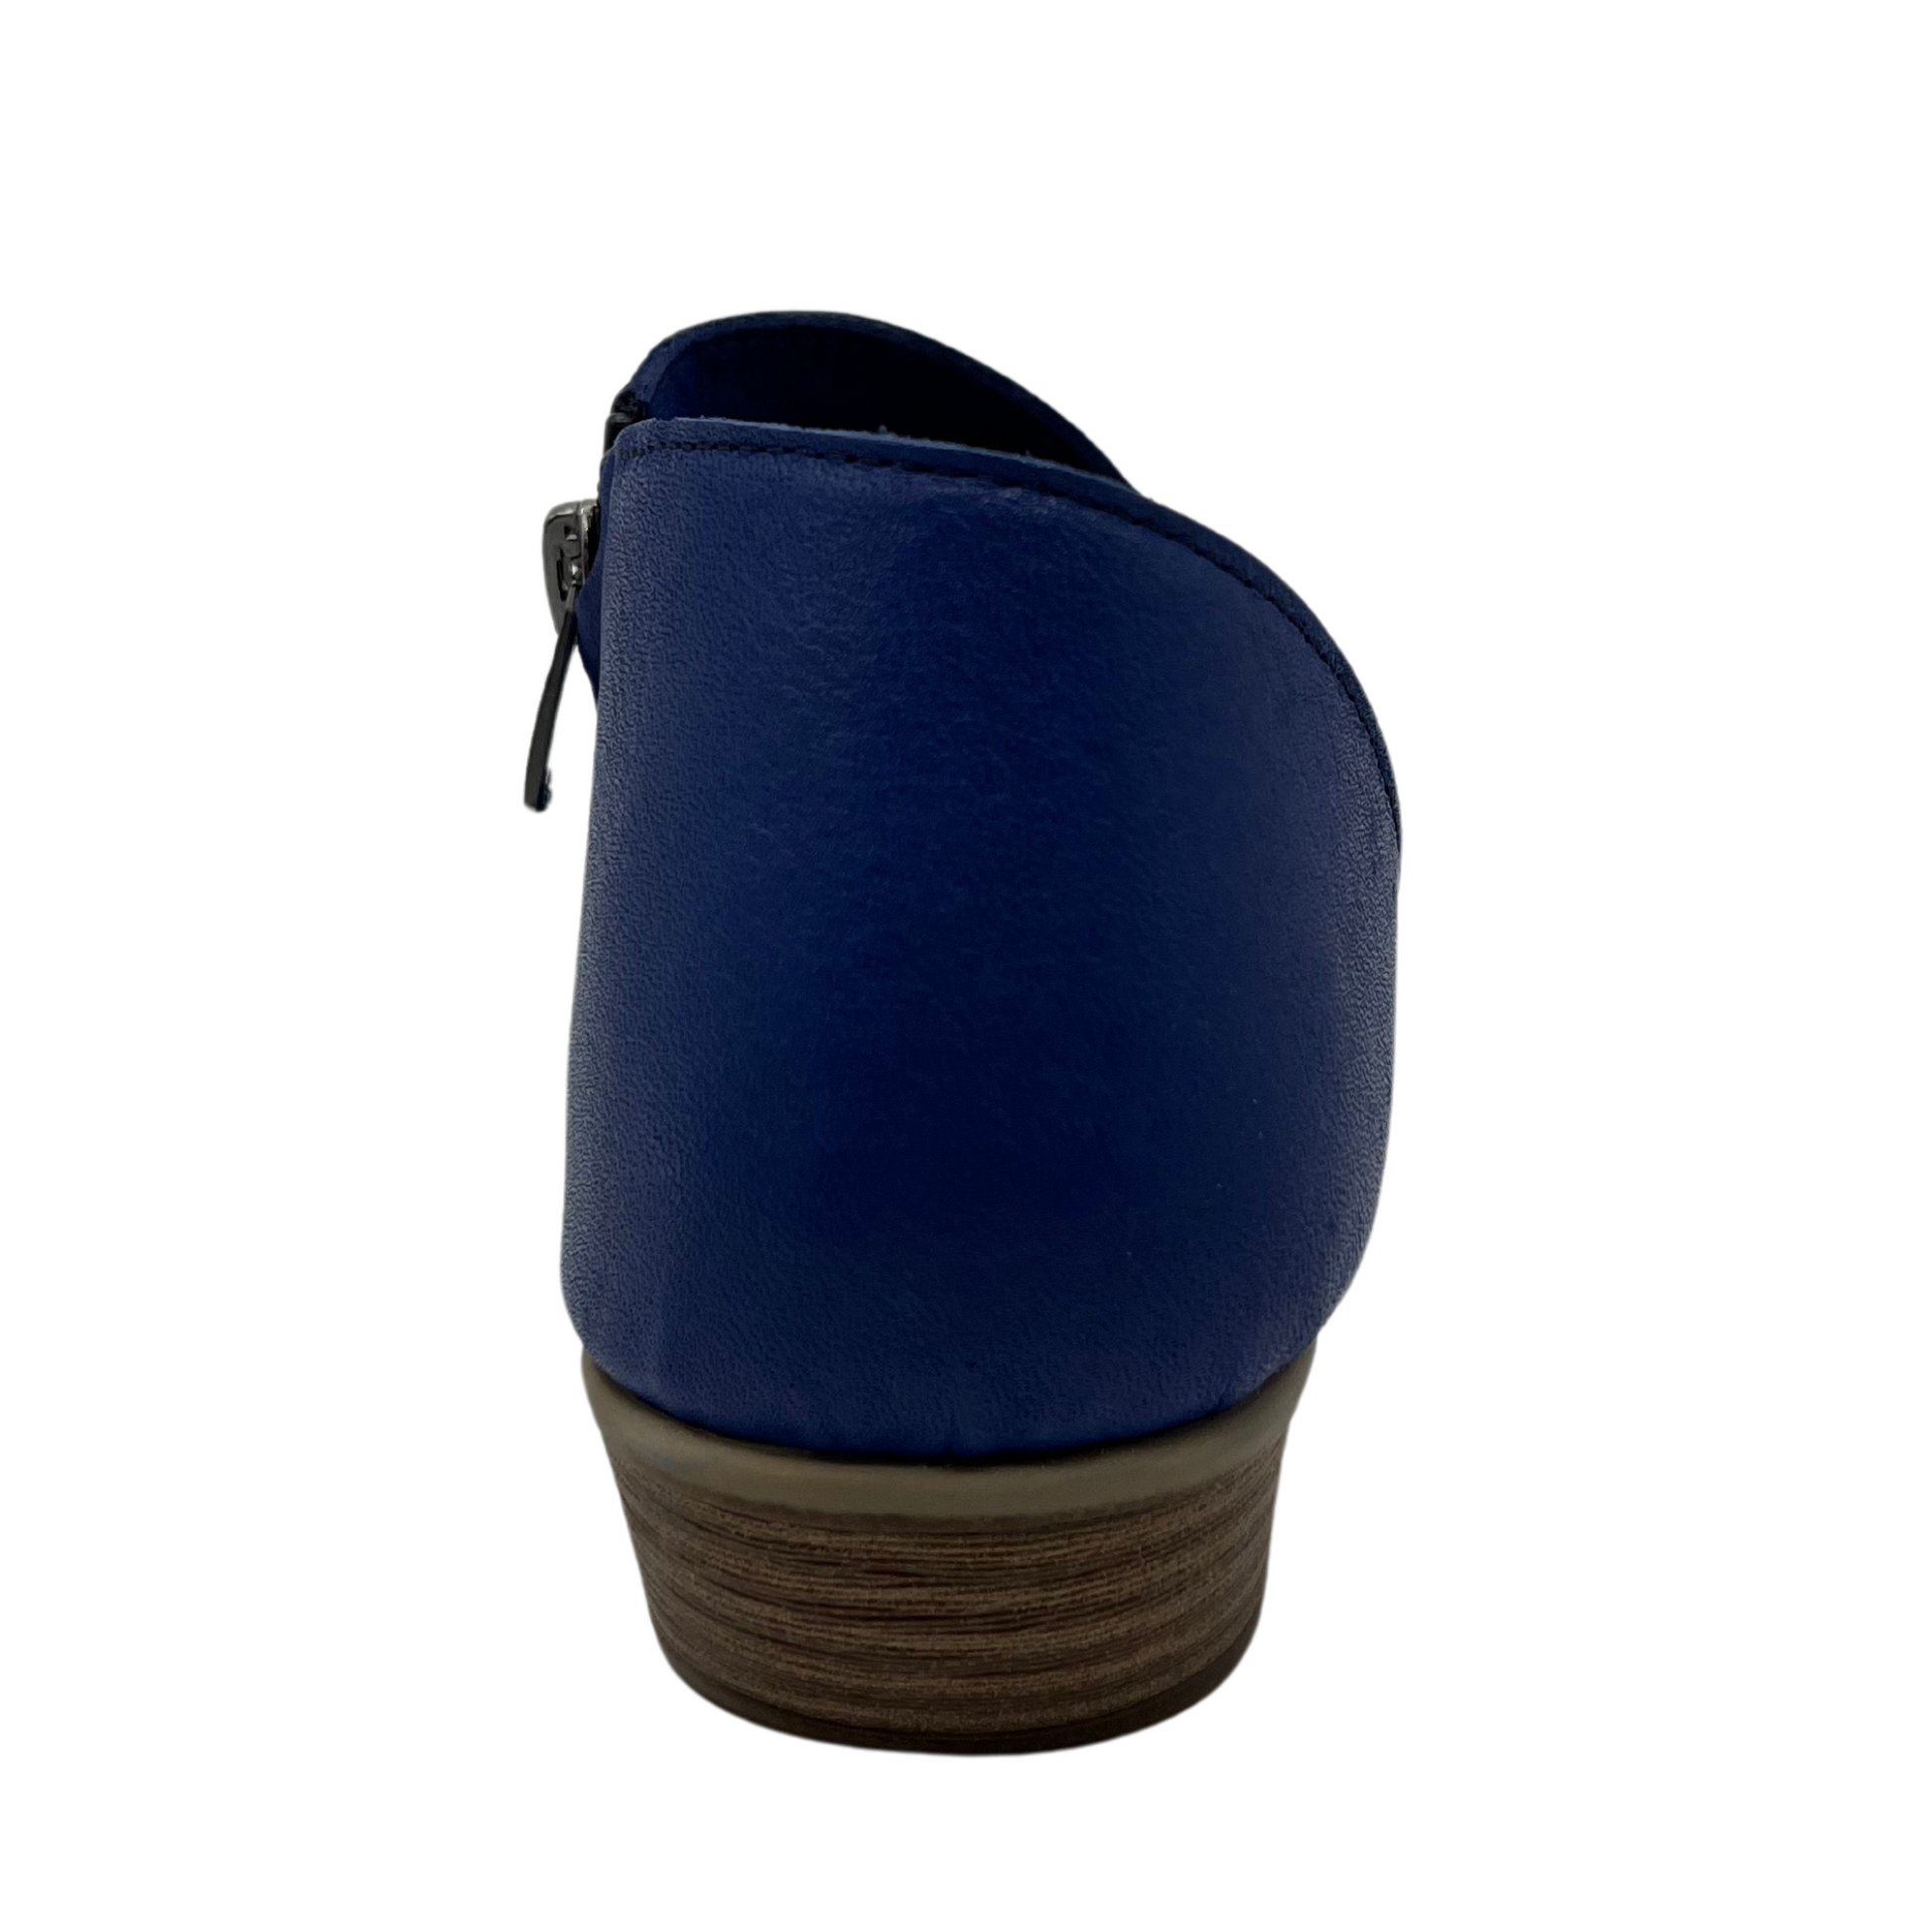 Back view of blue leather sandal with side zipper, short heel and open side design